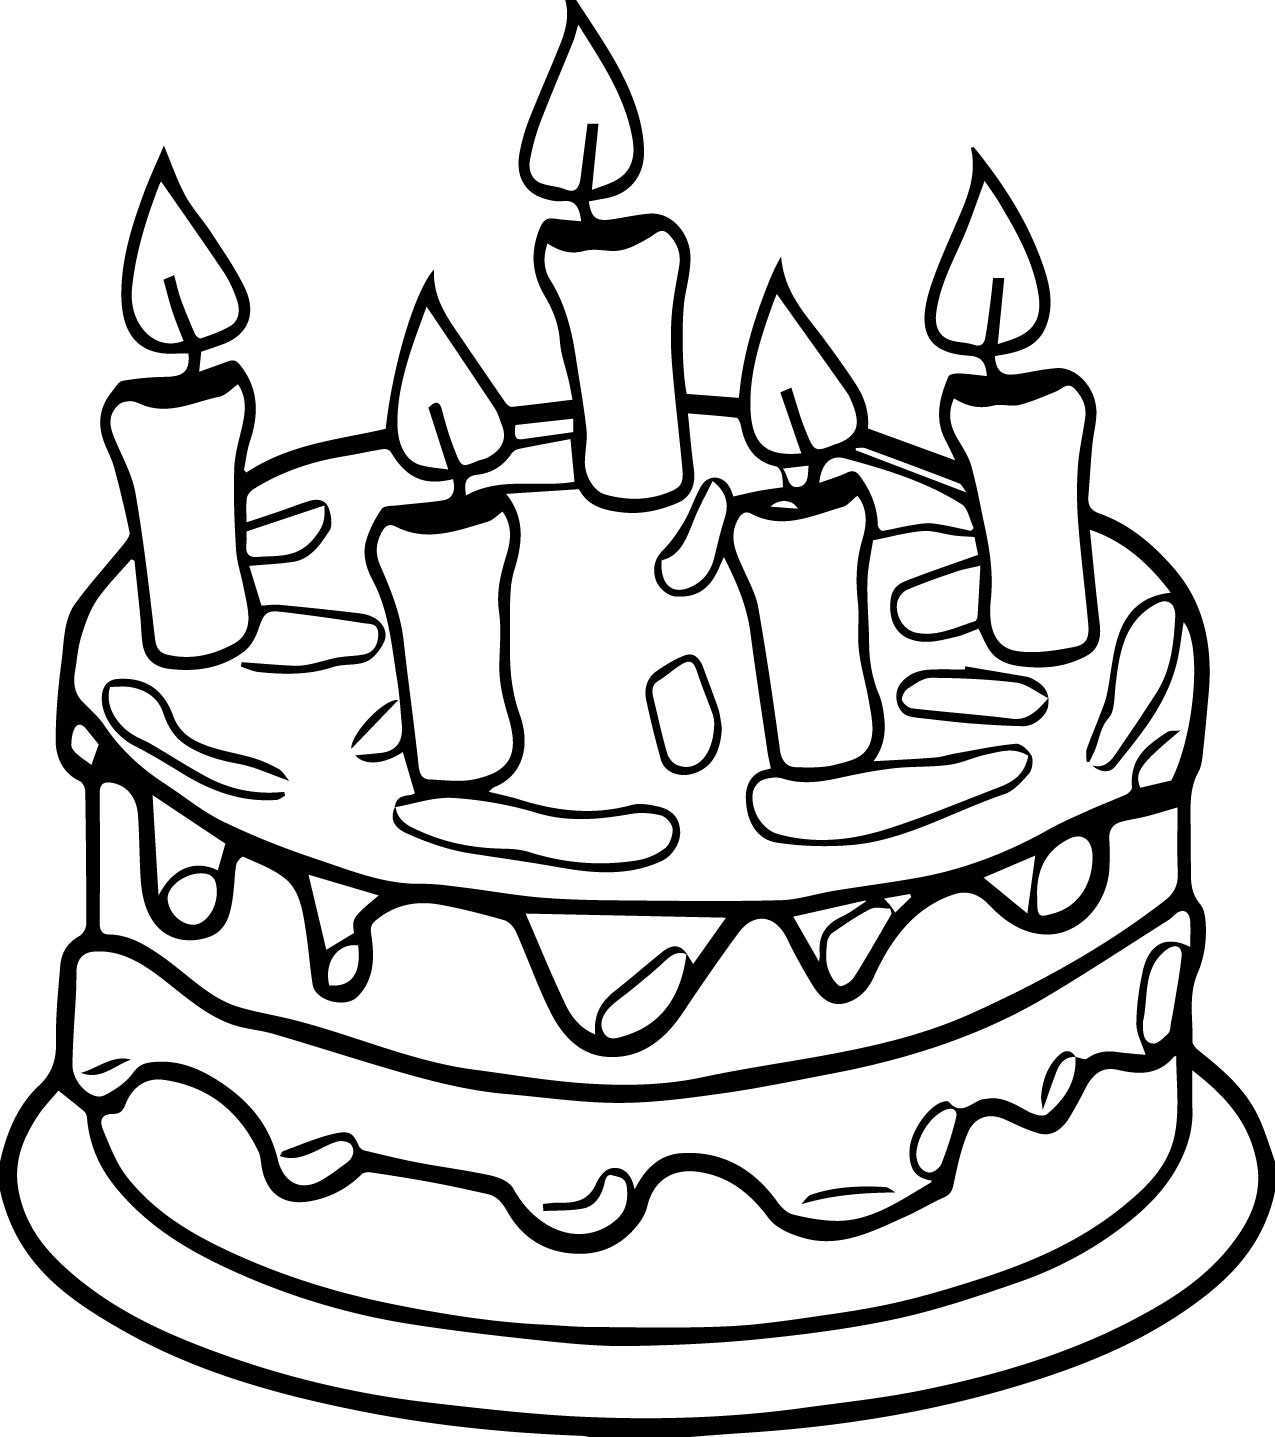 Birthday Cake Coloring Page
 Birthday Cake Candle Coloring Page